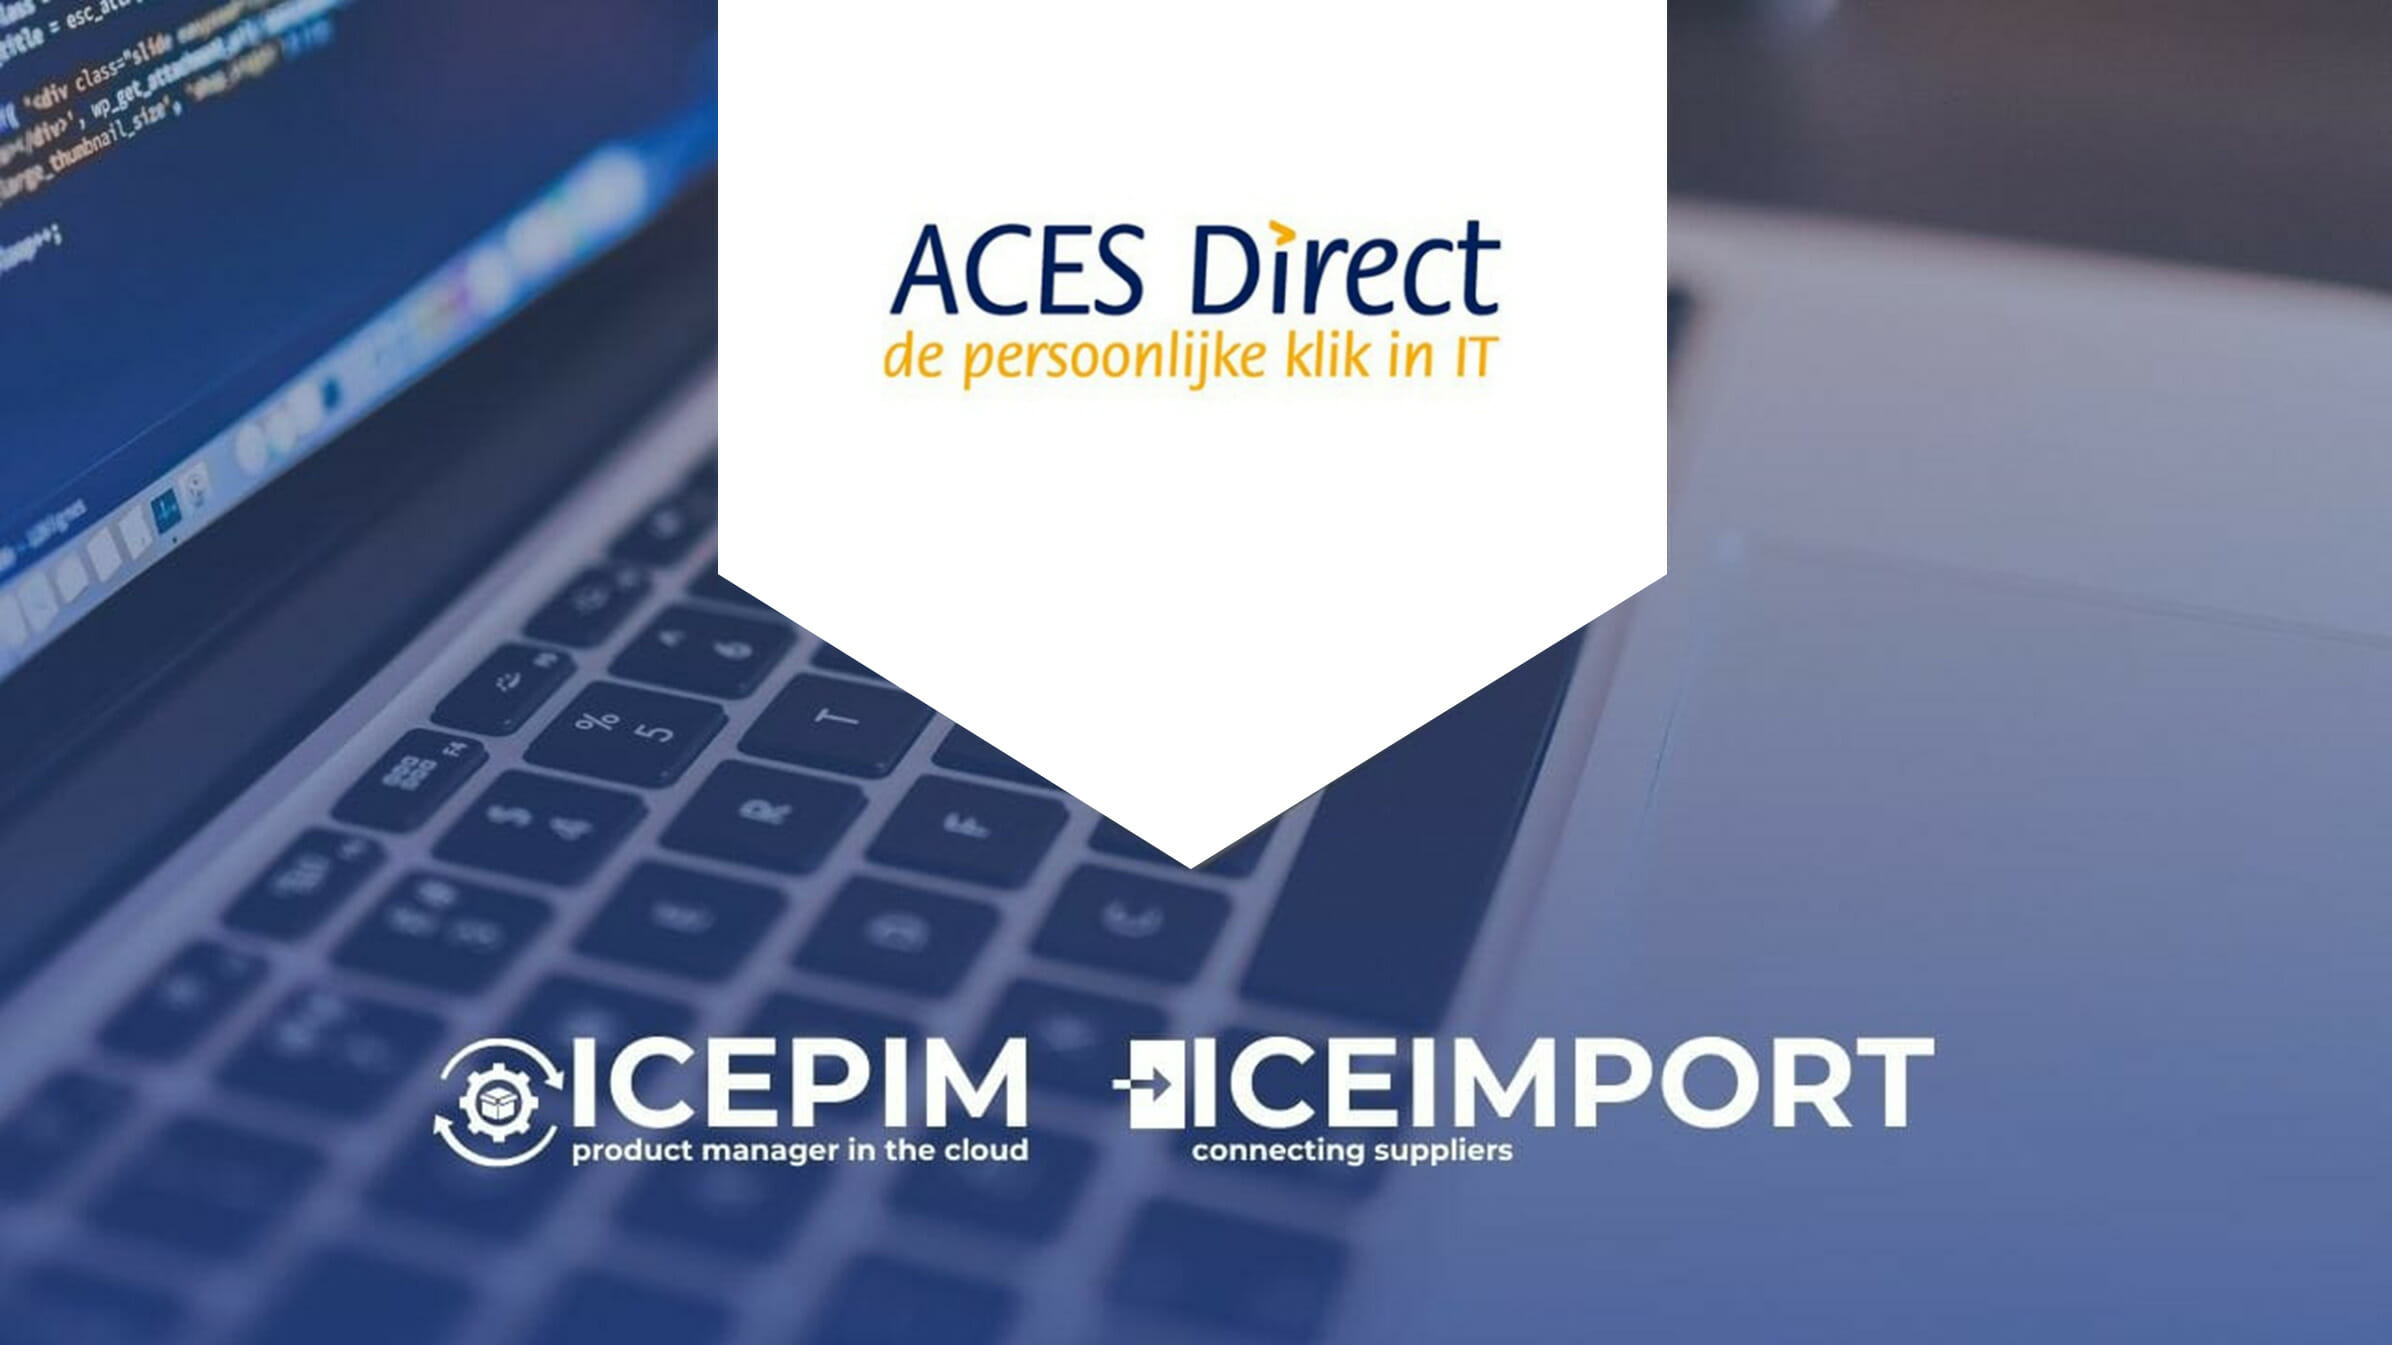 IT Supplier Aces Direct Successfully Uses Iceshop Services to Optimize its Processes